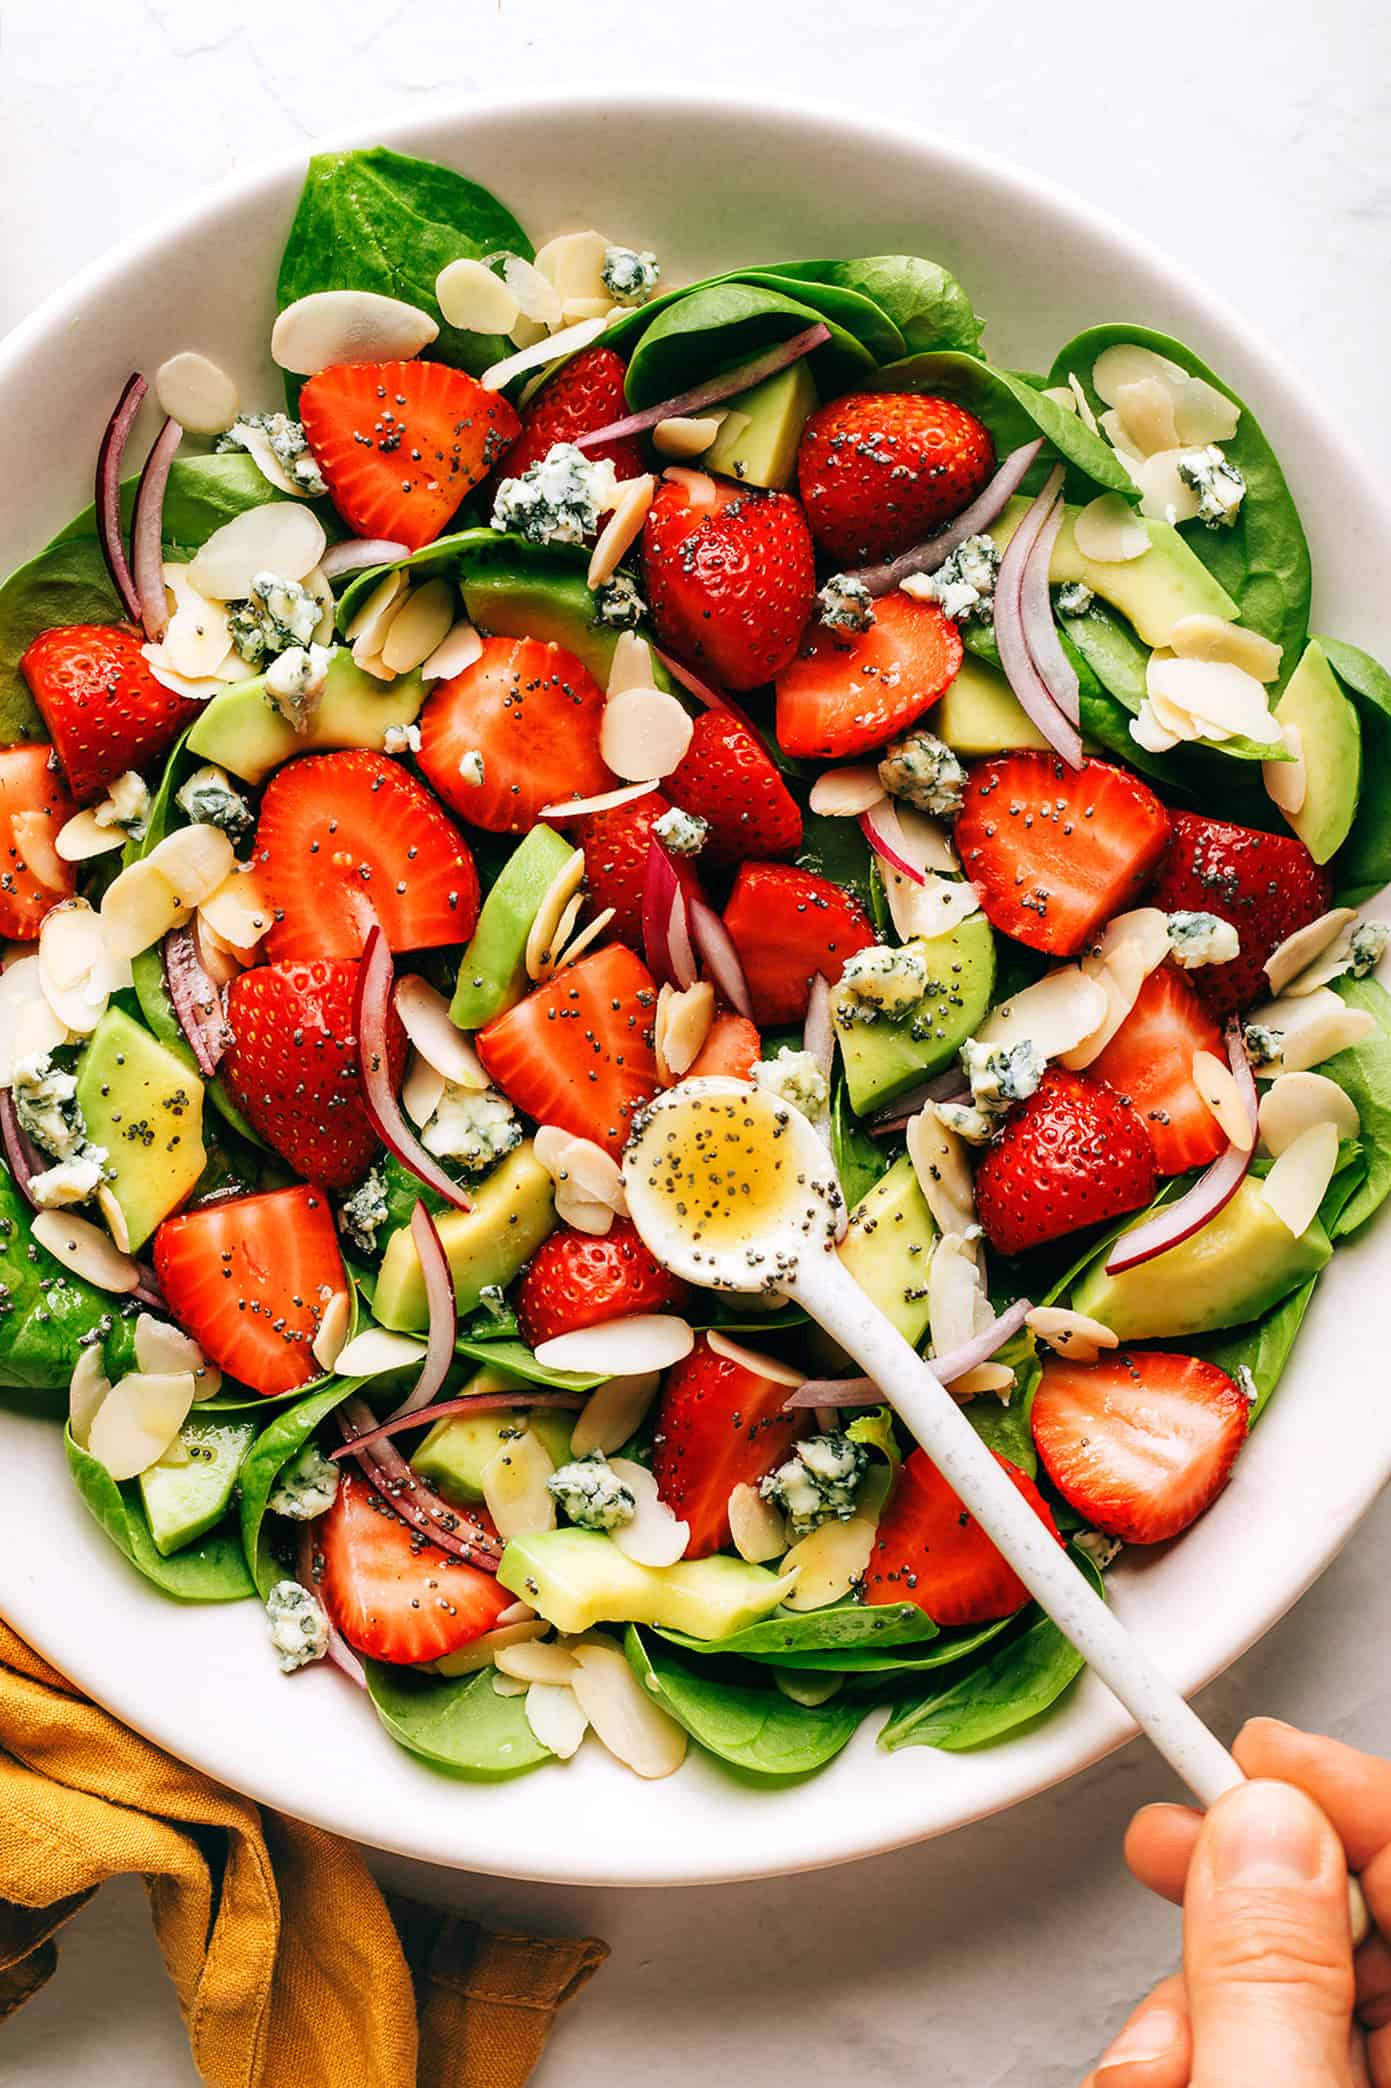 Strawberry Spinach Salad with Poppy Seed Vinaigrette